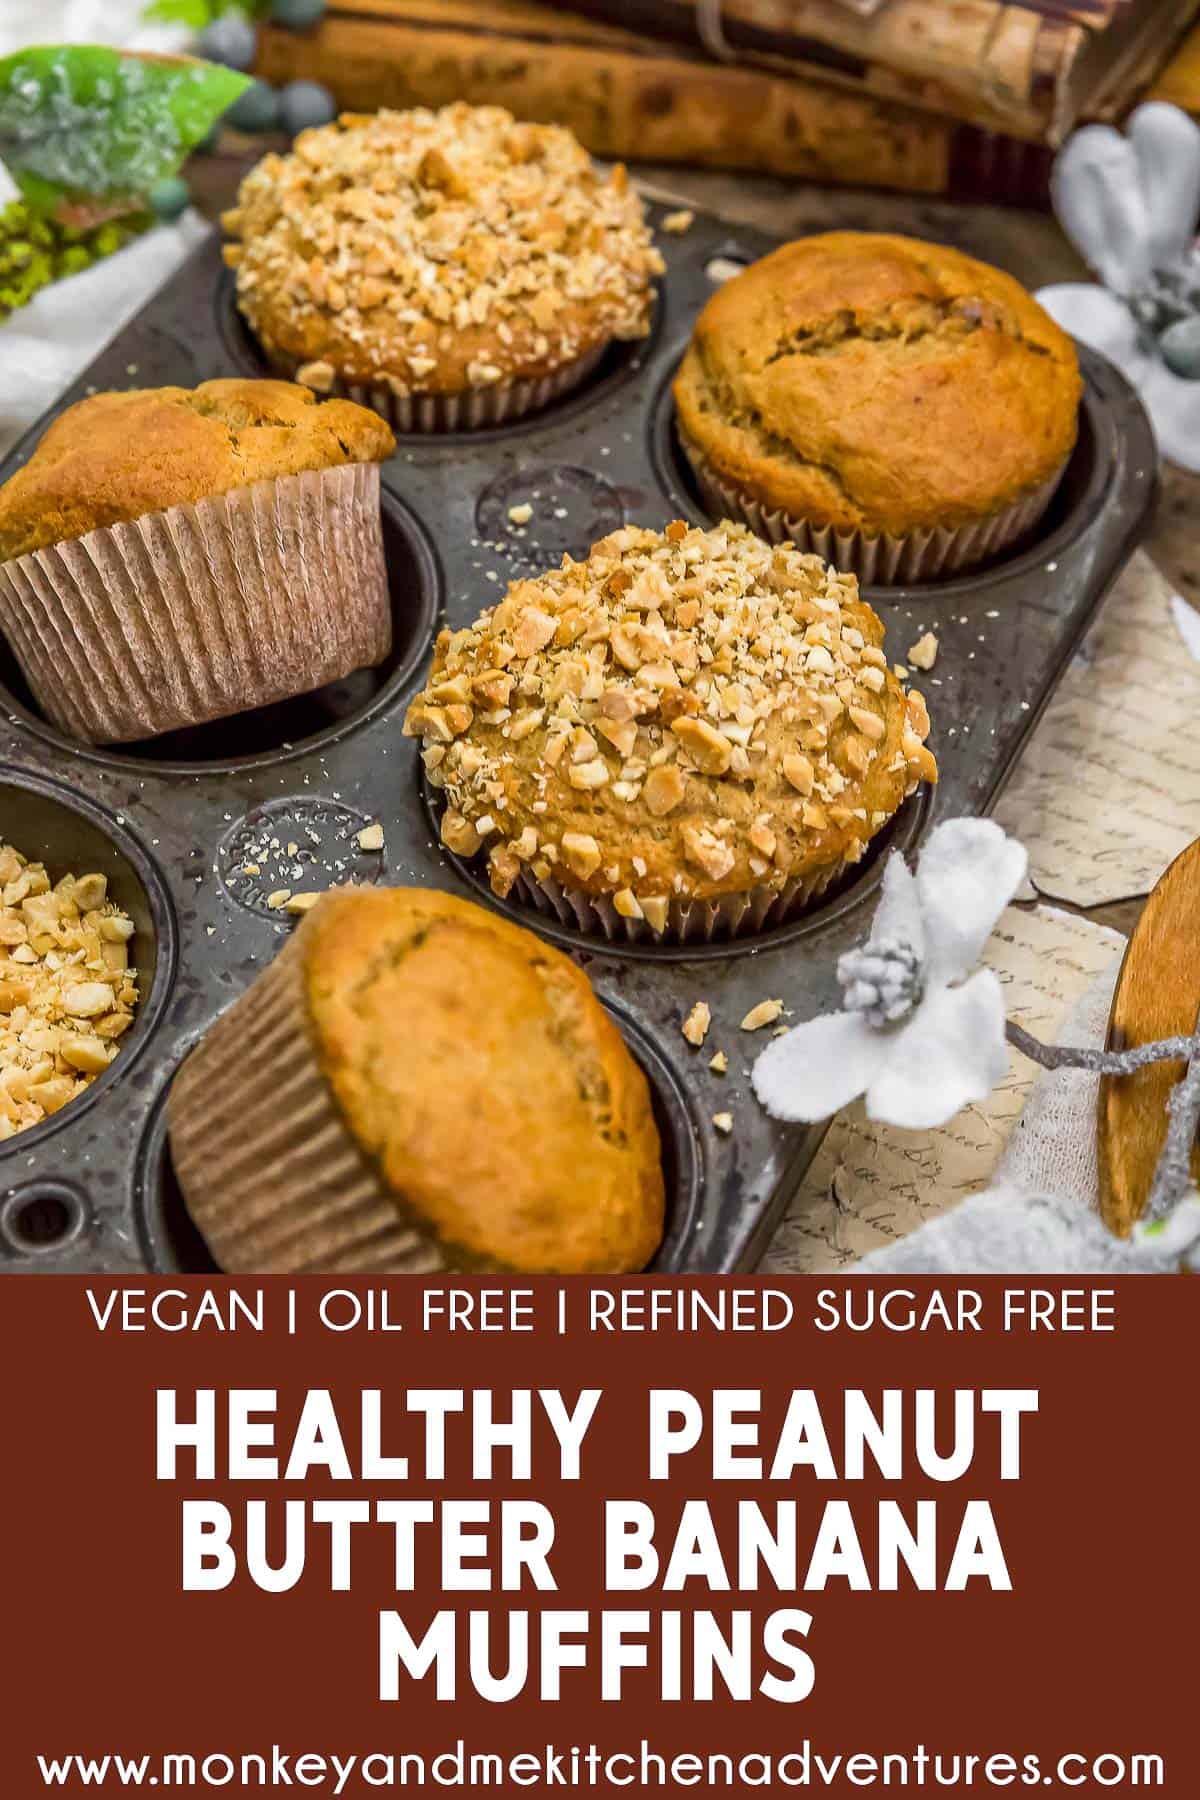 Healthy Peanut Butter Banana Muffins with text description